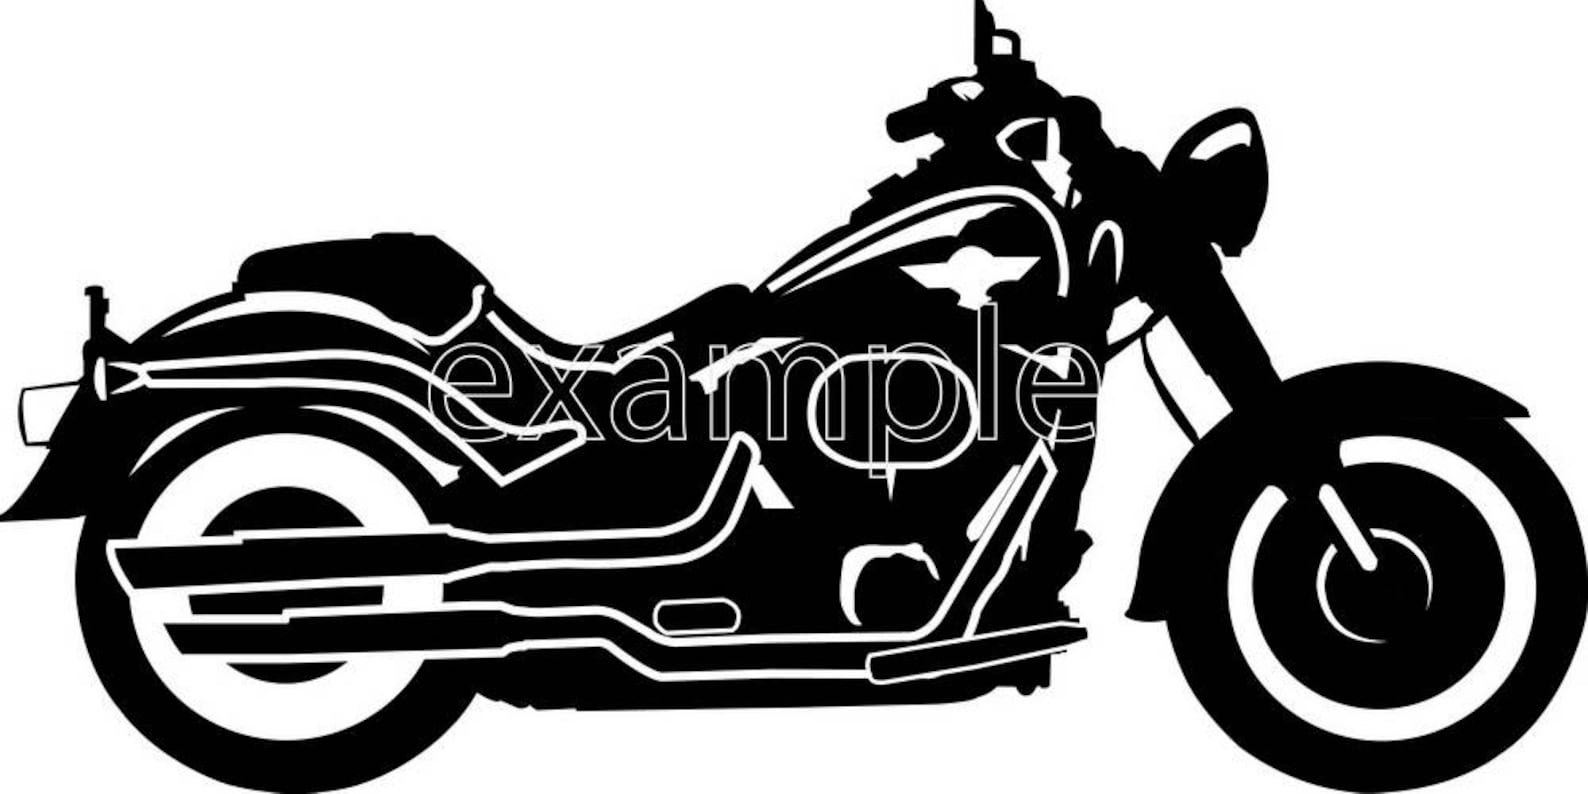 Download Harley clipartmotorcycle svg Eps Dxf files For Silhouette | Etsy